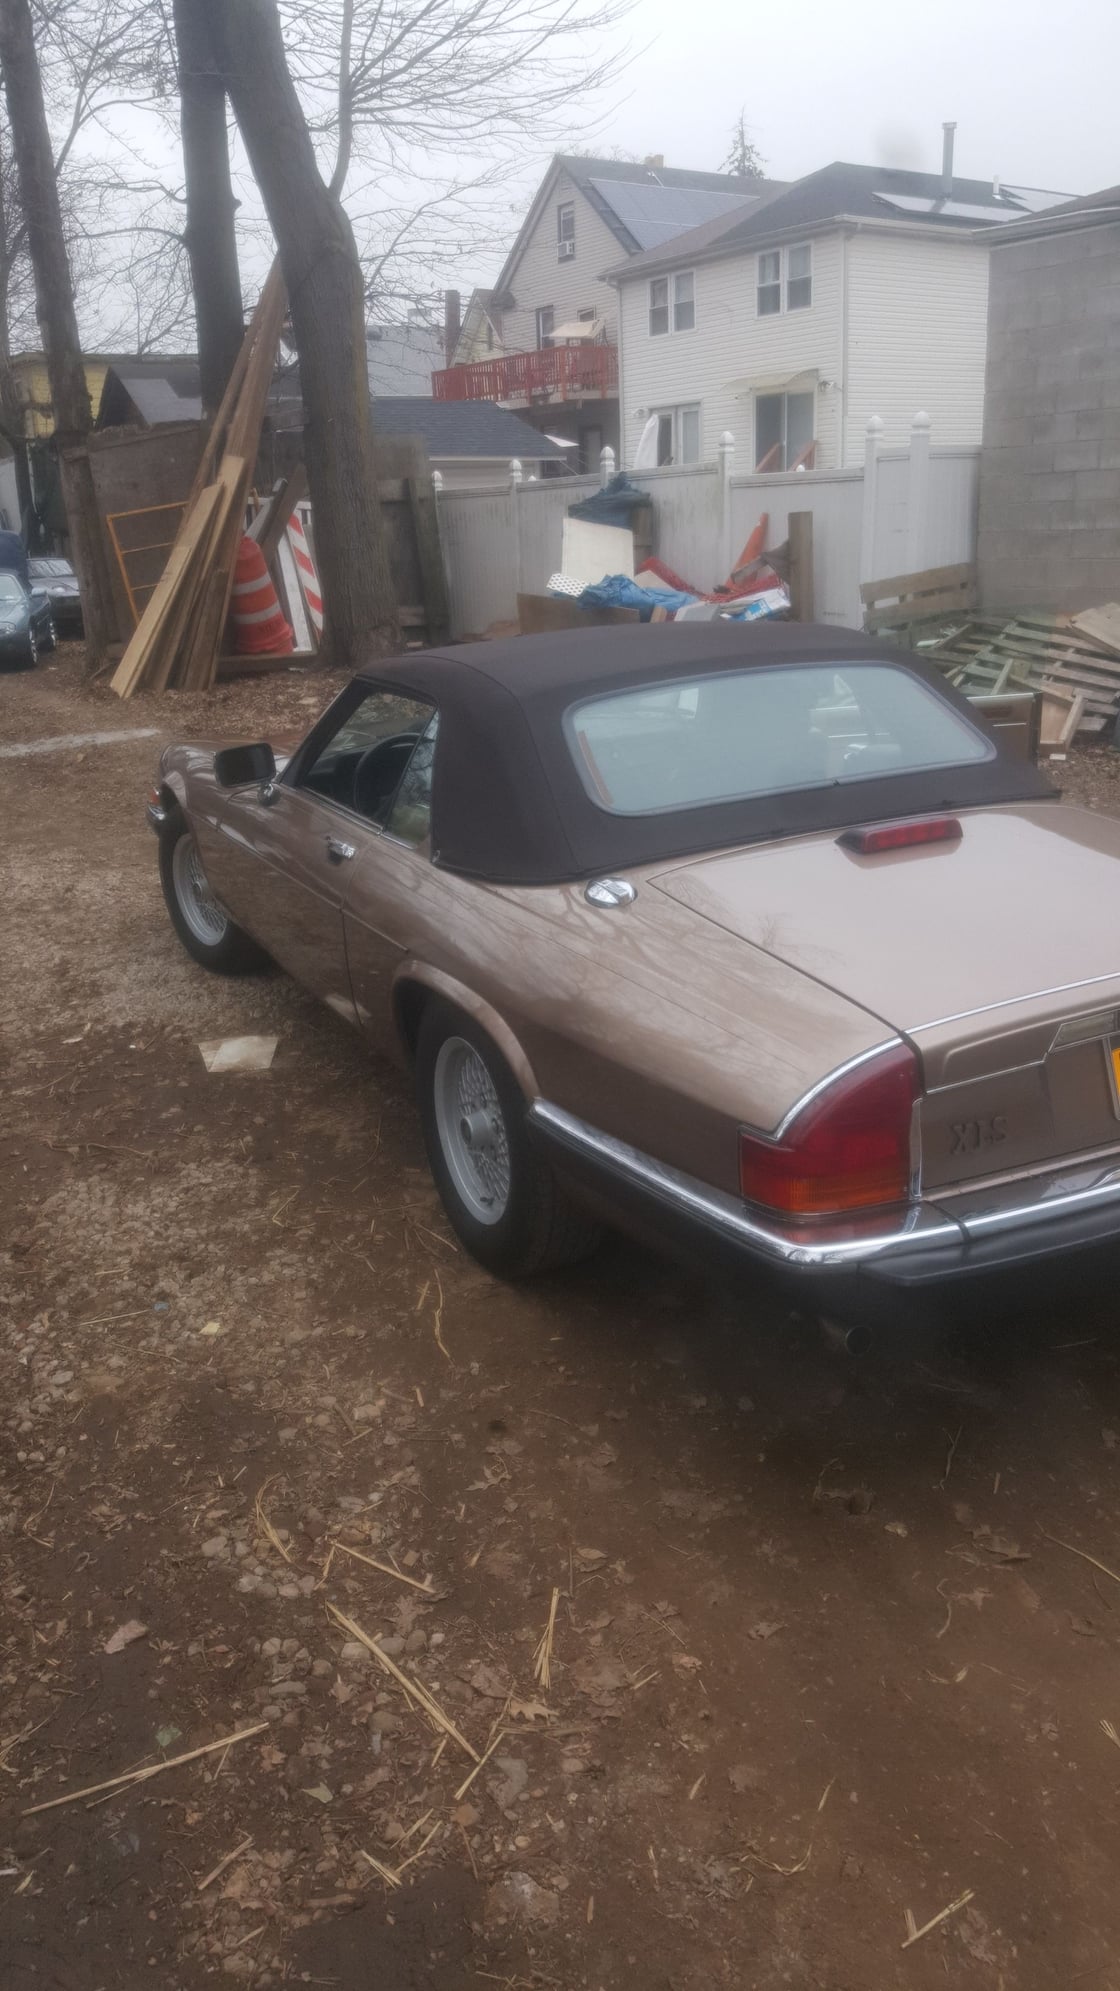 1989 Jaguar XJS - 1989 Jaguar xjs v12 convertible for sale - Used - VIN SAJNW4848LC169013 - 51,000 Miles - 12 cyl - 2WD - Convertible - Gold - Staten Island, NY 10302, United States